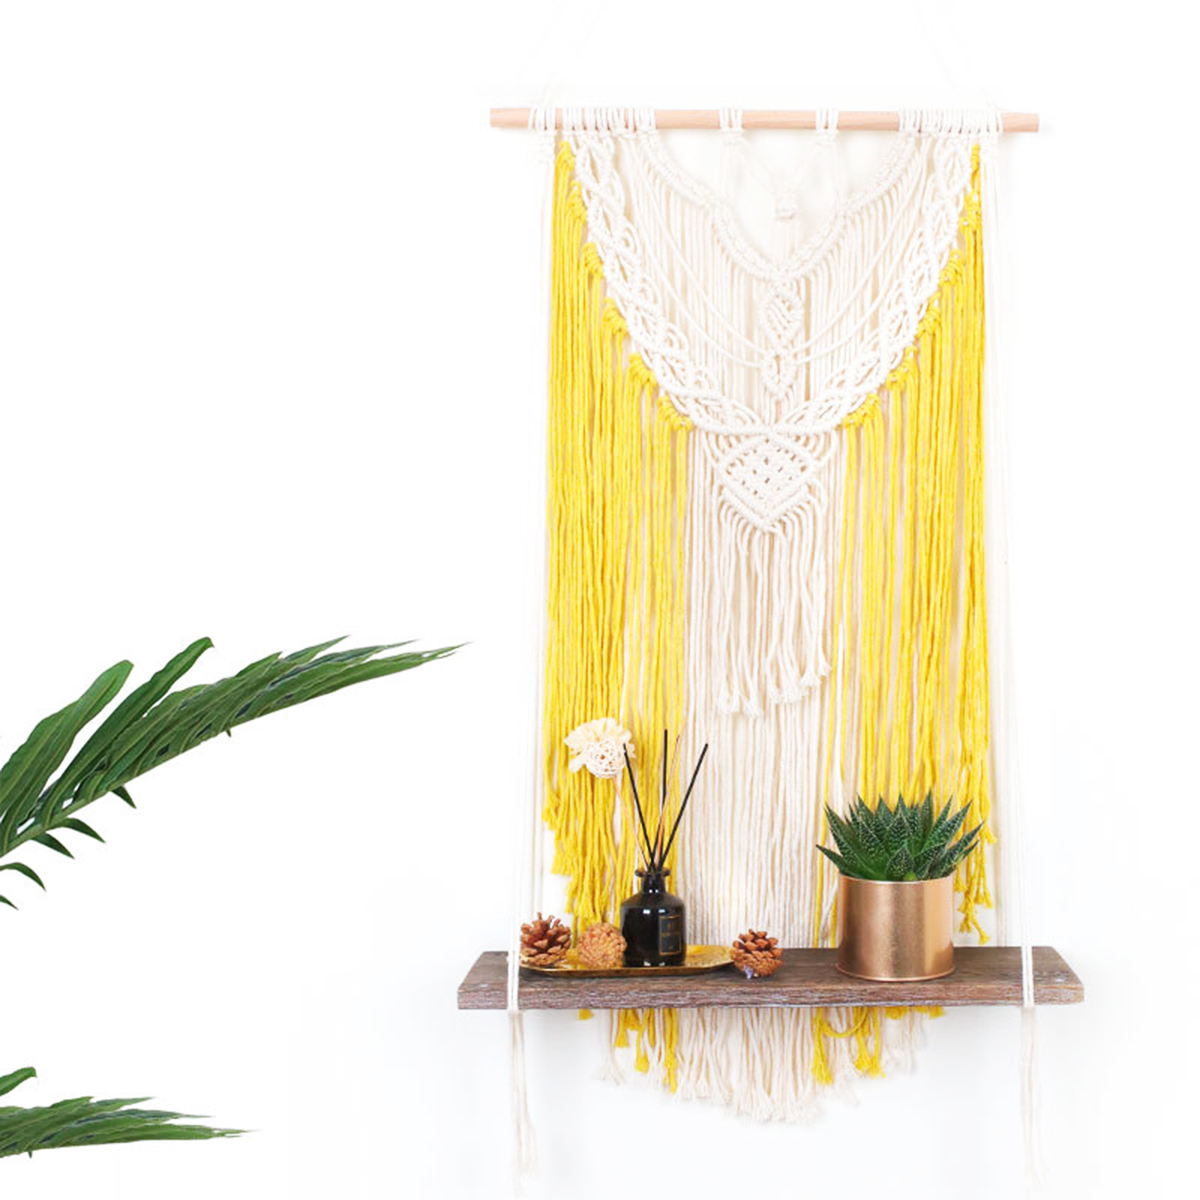 Wall-mounted-Lace-Woven-Macrame-Plant-Hanger-Wall-Cotton-Rope-Tapestry-Shelf-1727270-7